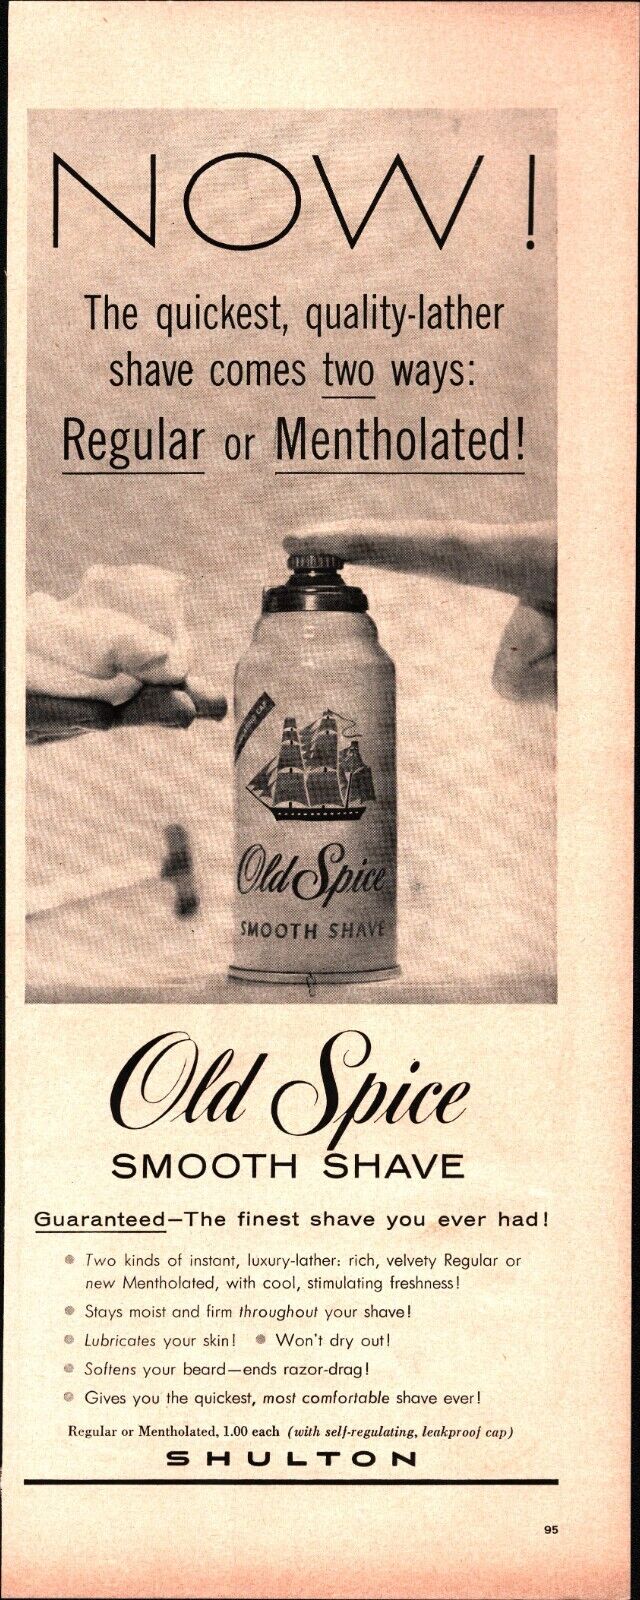 Vtg 1958 Old Spice Shaving Cream The Finest Shave You Ever Had ad nostalgic a6